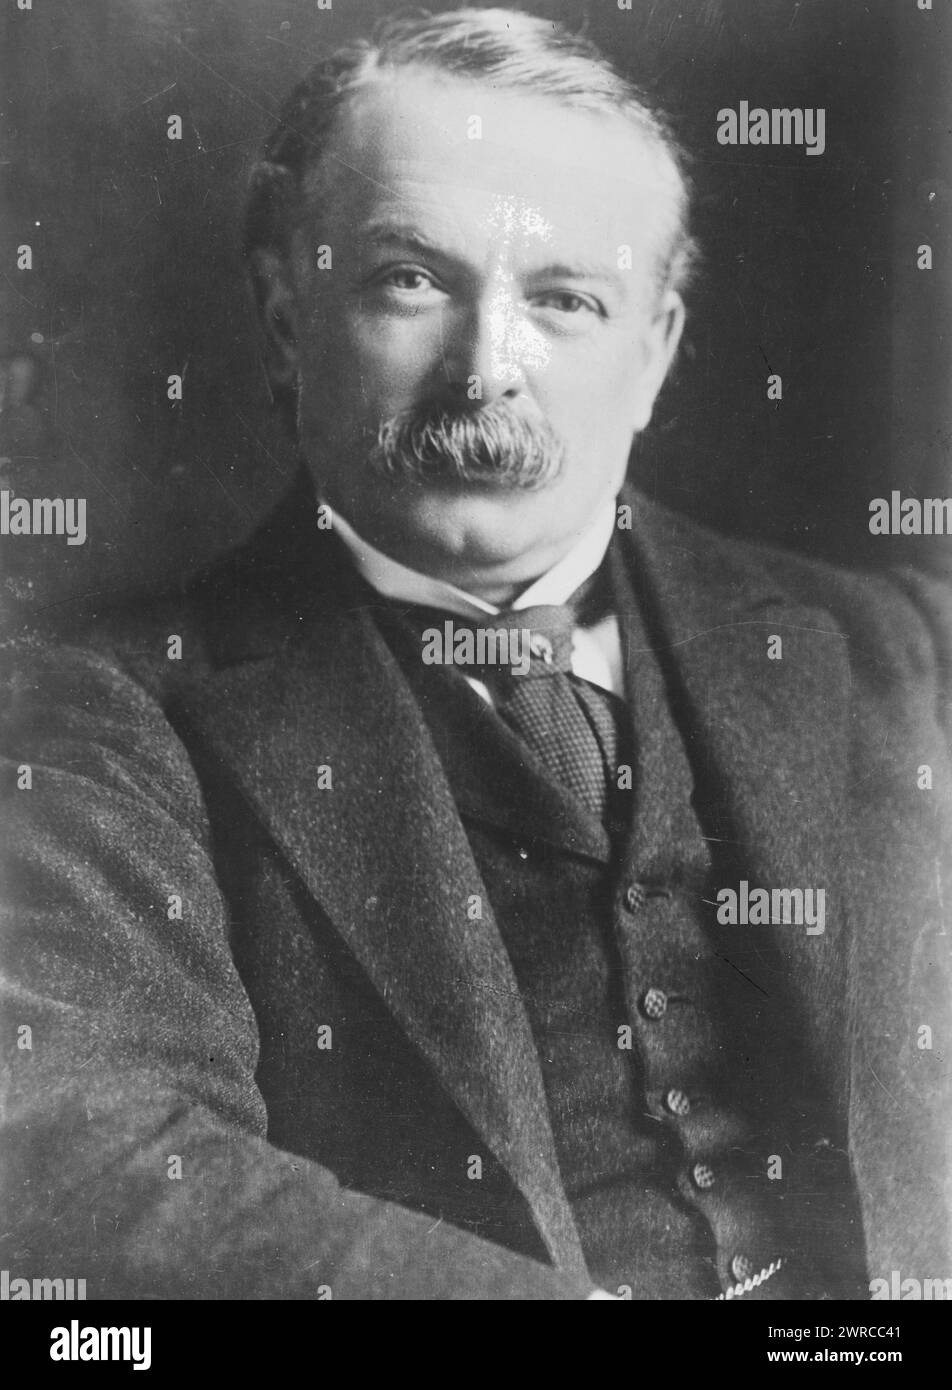 D. Lloyd George, Photograph shows British Liberal Party statesman David Lloyd George, 1st Earl Lloyd-George of Dwyfor (1863-1945) who served as Prime Minister from 1916-1922., between ca. 1915 and ca. 1920, Glass negatives, 1 negative: glass Stock Photo